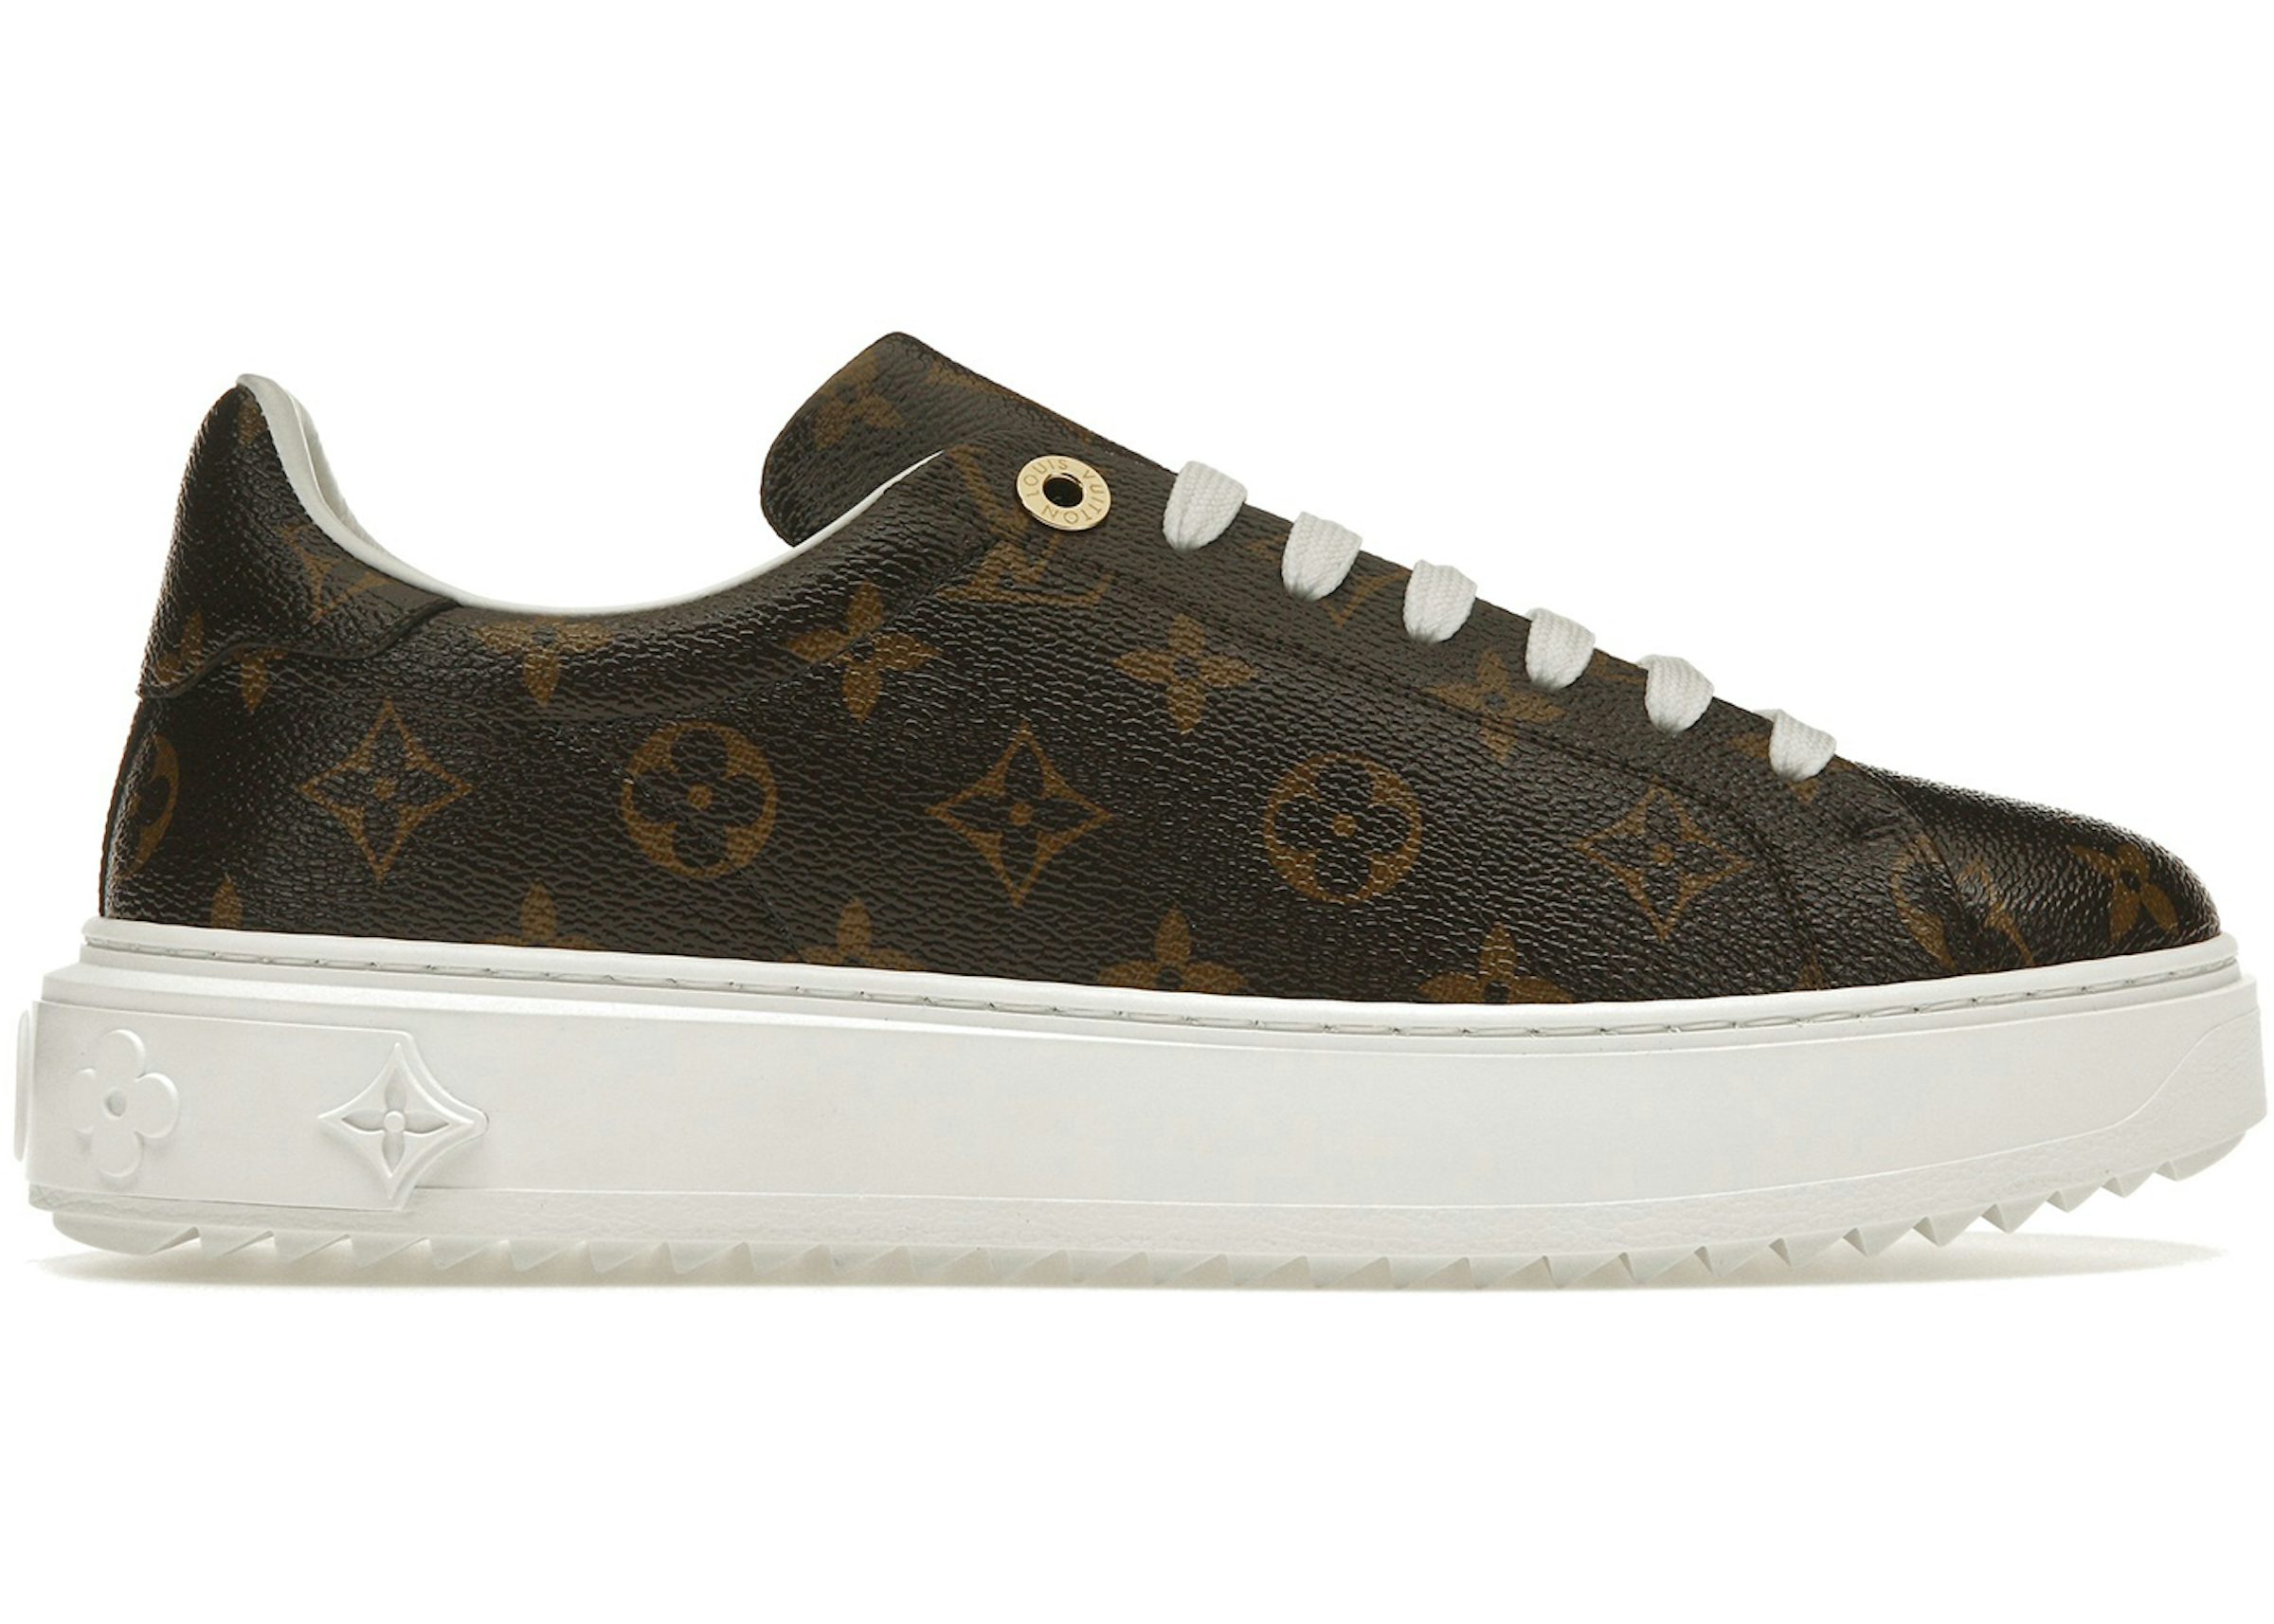 used Louis Vuitton Monogram Time Out Sneakers Shoes 8.5